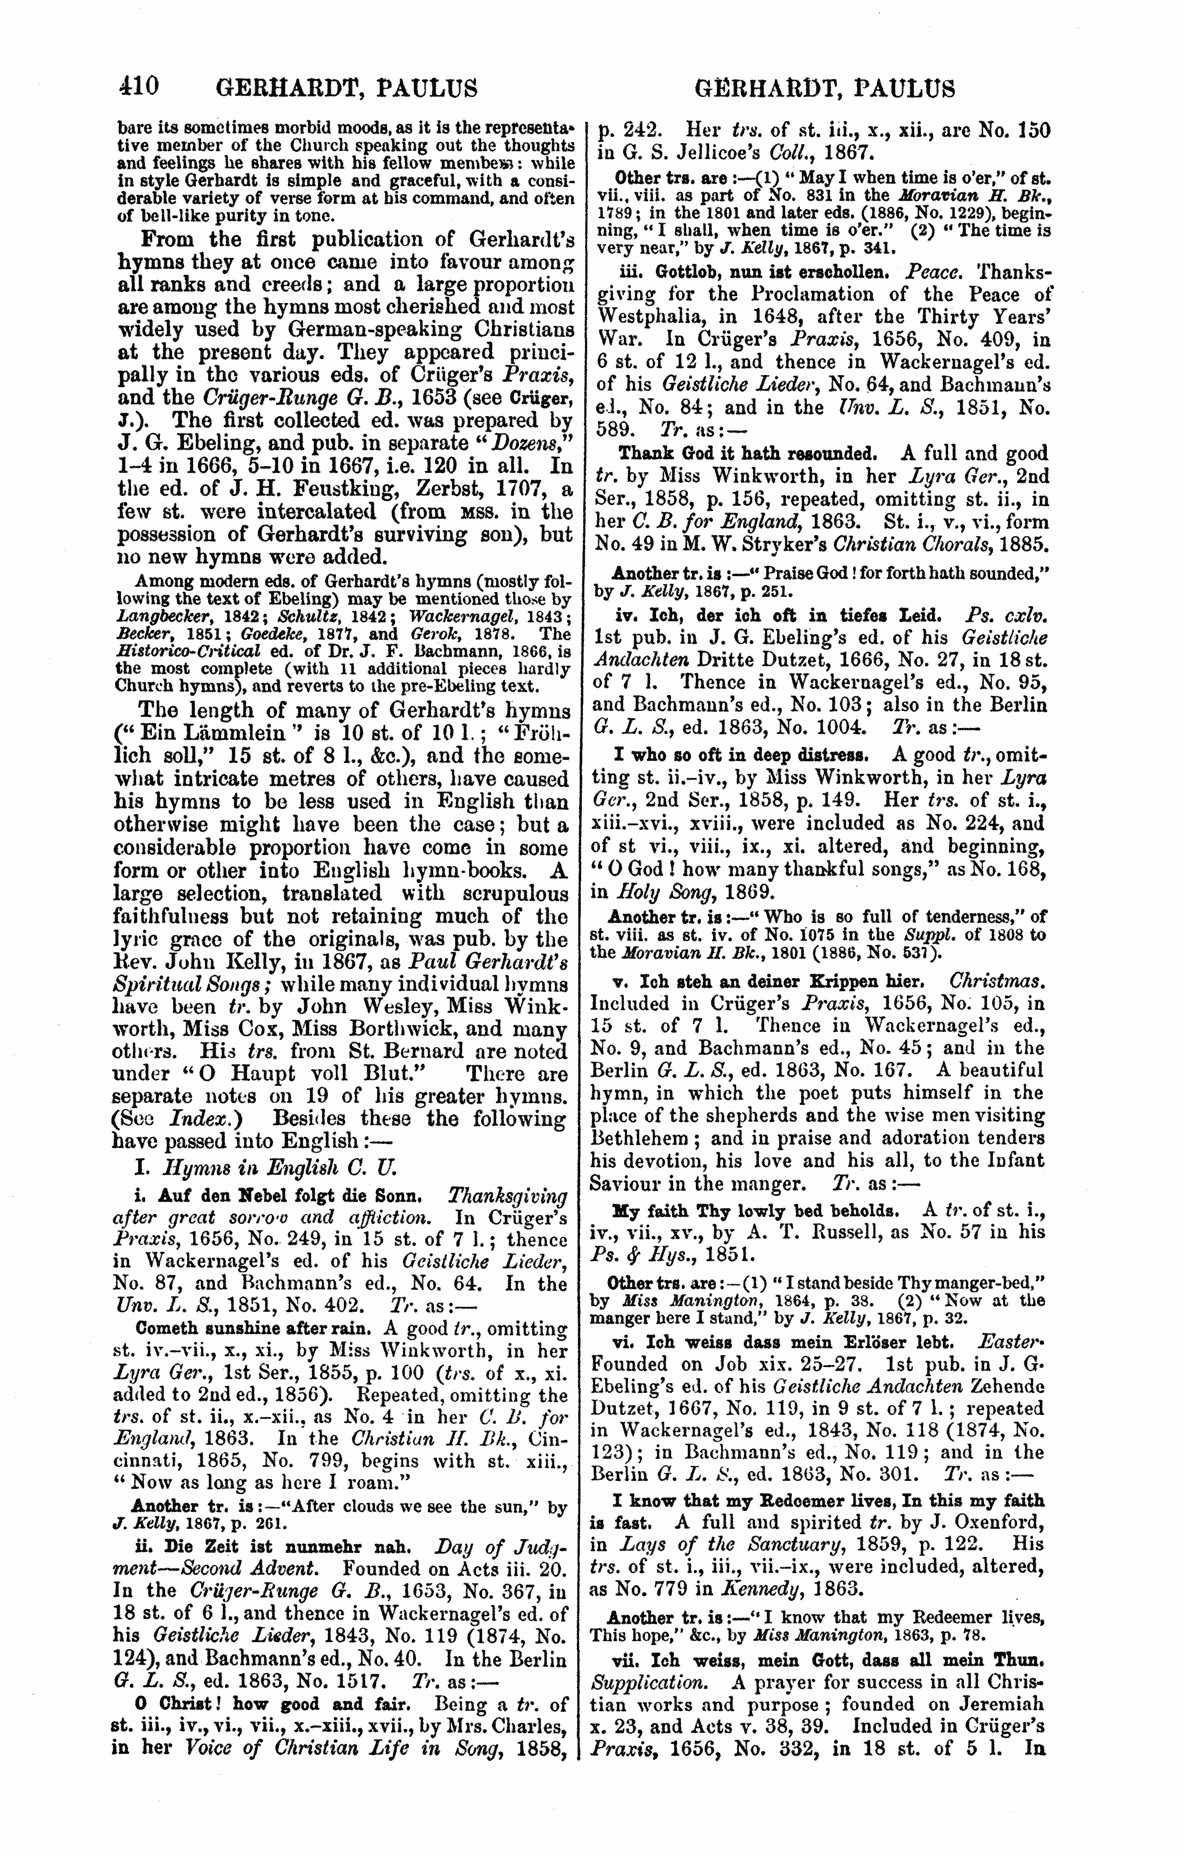 Image of page 410